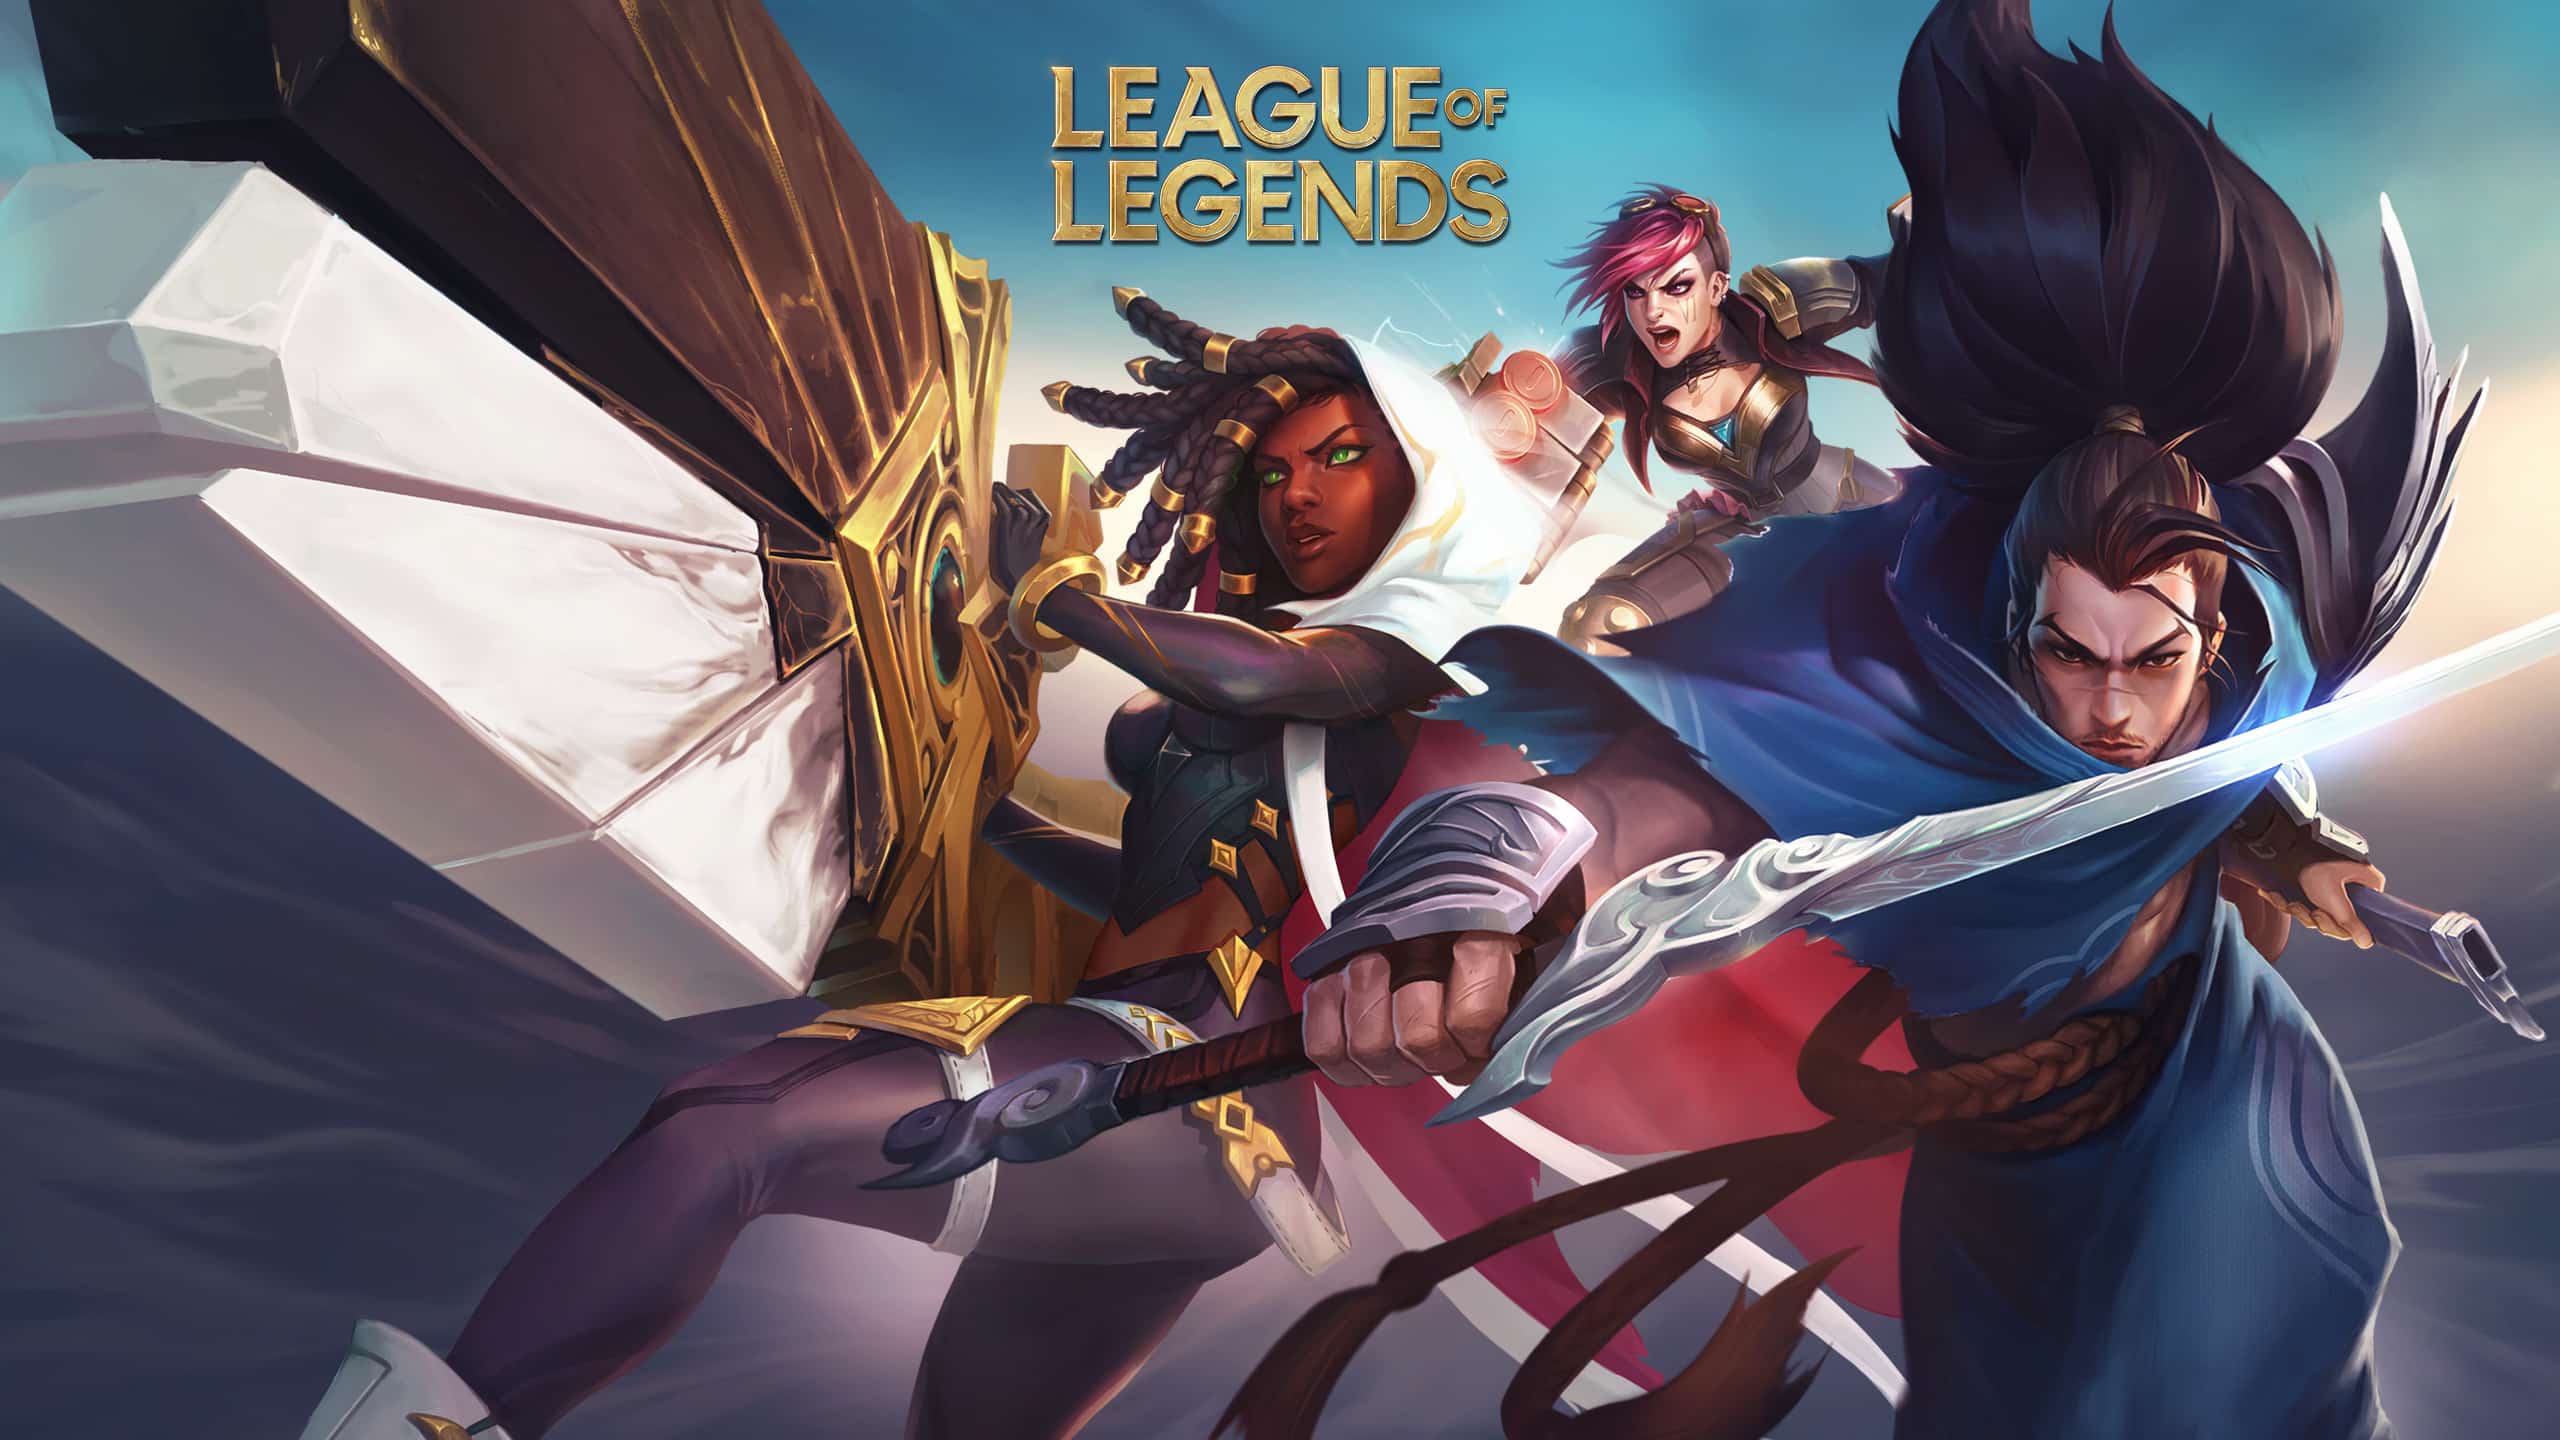 When will League of Legends patch 13.4 be released?